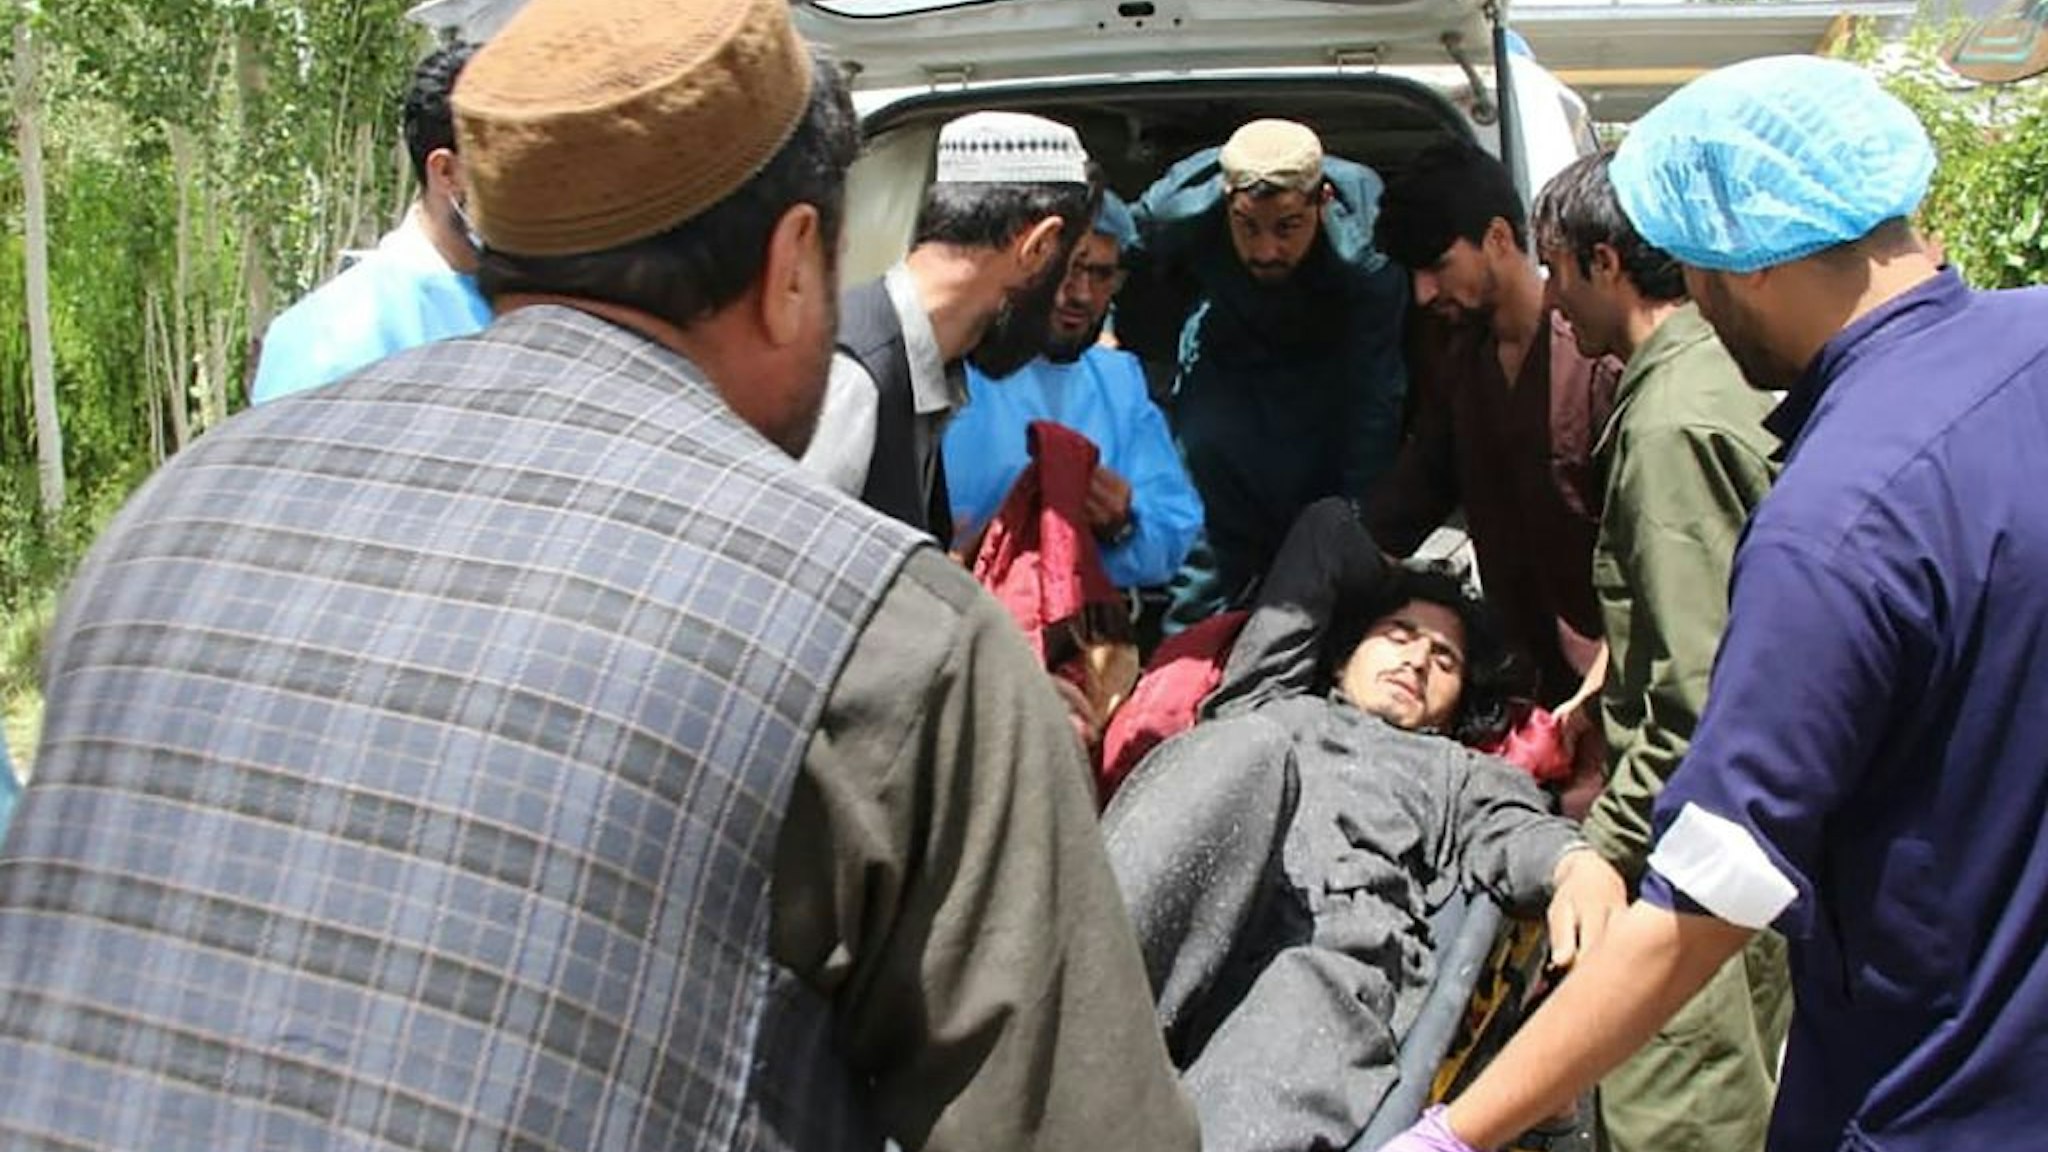 This photograph taken on June 22, 2022 and received as a courtesy of the Afghan government-run Bakhtar News Agency shows Afghan men shift an injured quake victim at a hospital following an earthquake in Gayan district, Paktika province. - A powerful earthquake struck a remote border region of Afghanistan overnight killing at least 920 people and injuring hundreds more, officials said on June 22, with the toll expected to rise as rescuers dig through collapsed dwellings. - XGTY / EDITORS NOTE --- RESTRICTED TO EDITORIAL USE - MANDATORY CREDIT "AFP PHOTO /Bakhtar News Agency " - NO MARKETING - NO ADVERTISING CAMPAIGNS - DISTRIBUTED AS A SERVICE TO CLIENTS - NO ARCHIVE (Photo by Bakhtar News Agency / AFP) / XGTY / EDITORS NOTE --- RESTRICTED TO EDITORIAL USE - MANDATORY CREDIT "AFP PHOTO /Bakhtar News Agency " - NO MARKETING - NO ADVERTISING CAMPAIGNS - DISTRIBUTED AS A SERVICE TO CLIENTS - NO ARCHIVE / XGTY / EDITORS NOTE --- RESTRICTED TO EDITORIAL USE - MANDATORY CREDIT "AFP PHOTO /Bakhtar News Agency " - NO MARKETING - NO ADVERTISING CAMPAIGNS - DISTRIBUTED AS A SERVICE TO CLIENTS - NO ARCHIVE